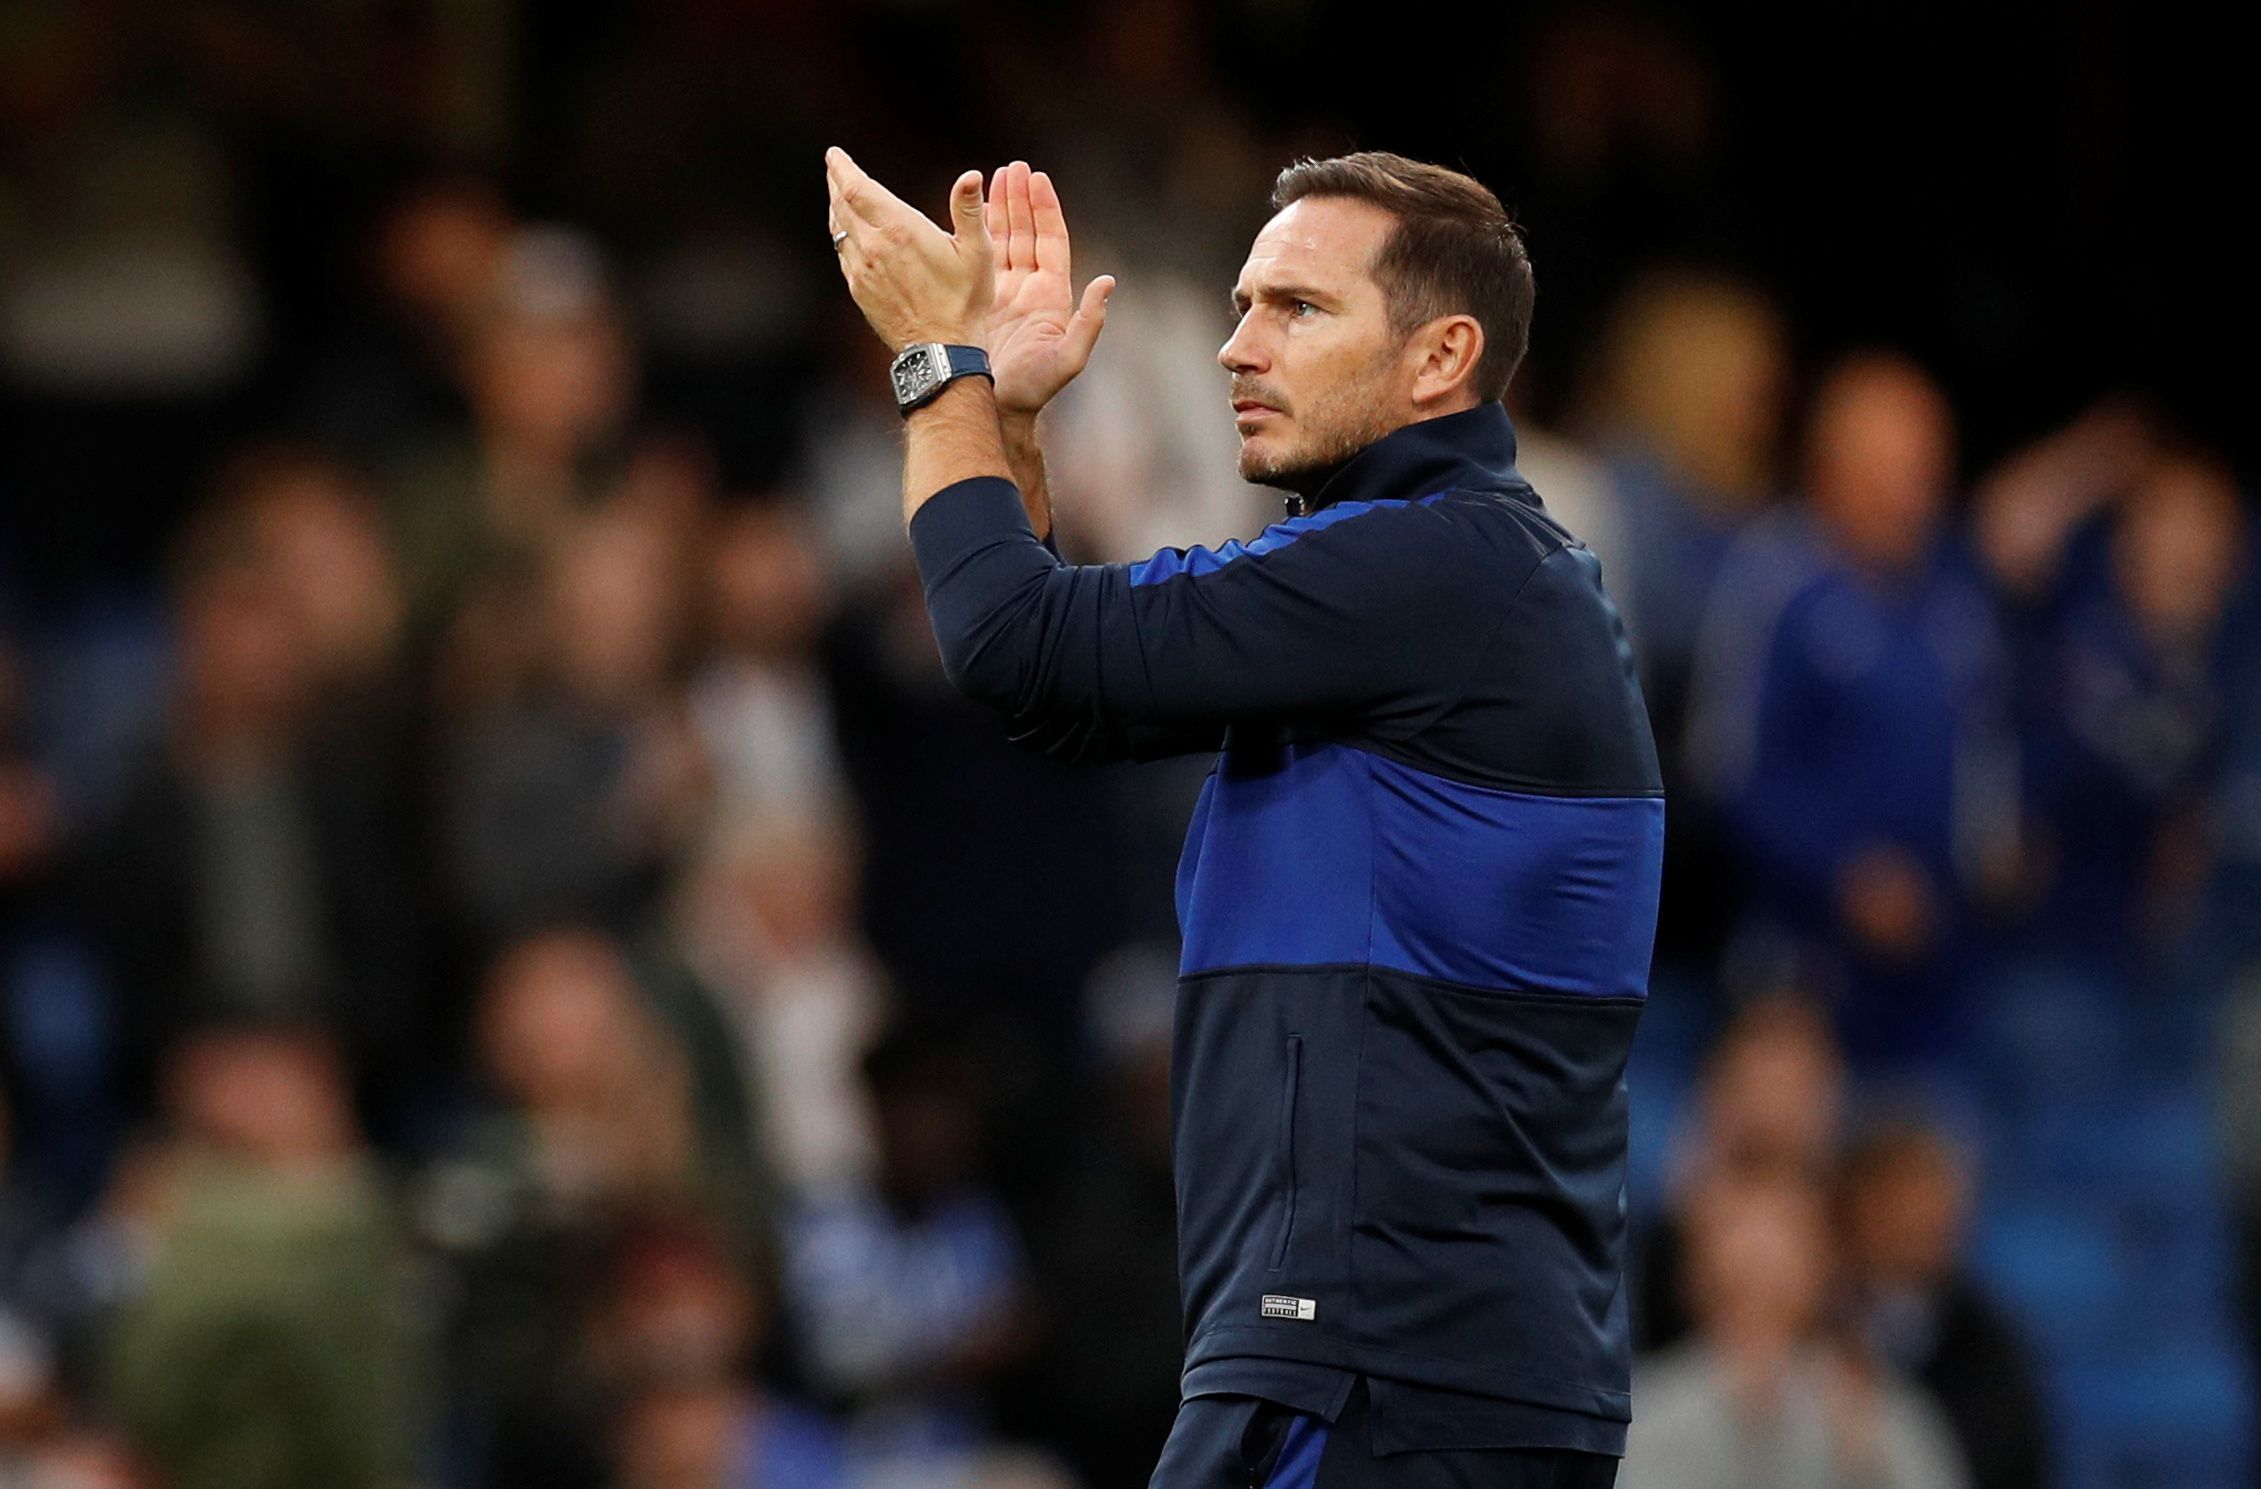 Soccer Football - Premier League - Chelsea v Liverpool - Stamford Bridge, London, Britain - September 22, 2019  Chelsea manager Frank Lampard applauds the fans after the match  Action Images via Reuters/John Sibley  EDITORIAL USE ONLY. No use with unauthorized audio, video, data, fixture lists, club/league logos or 